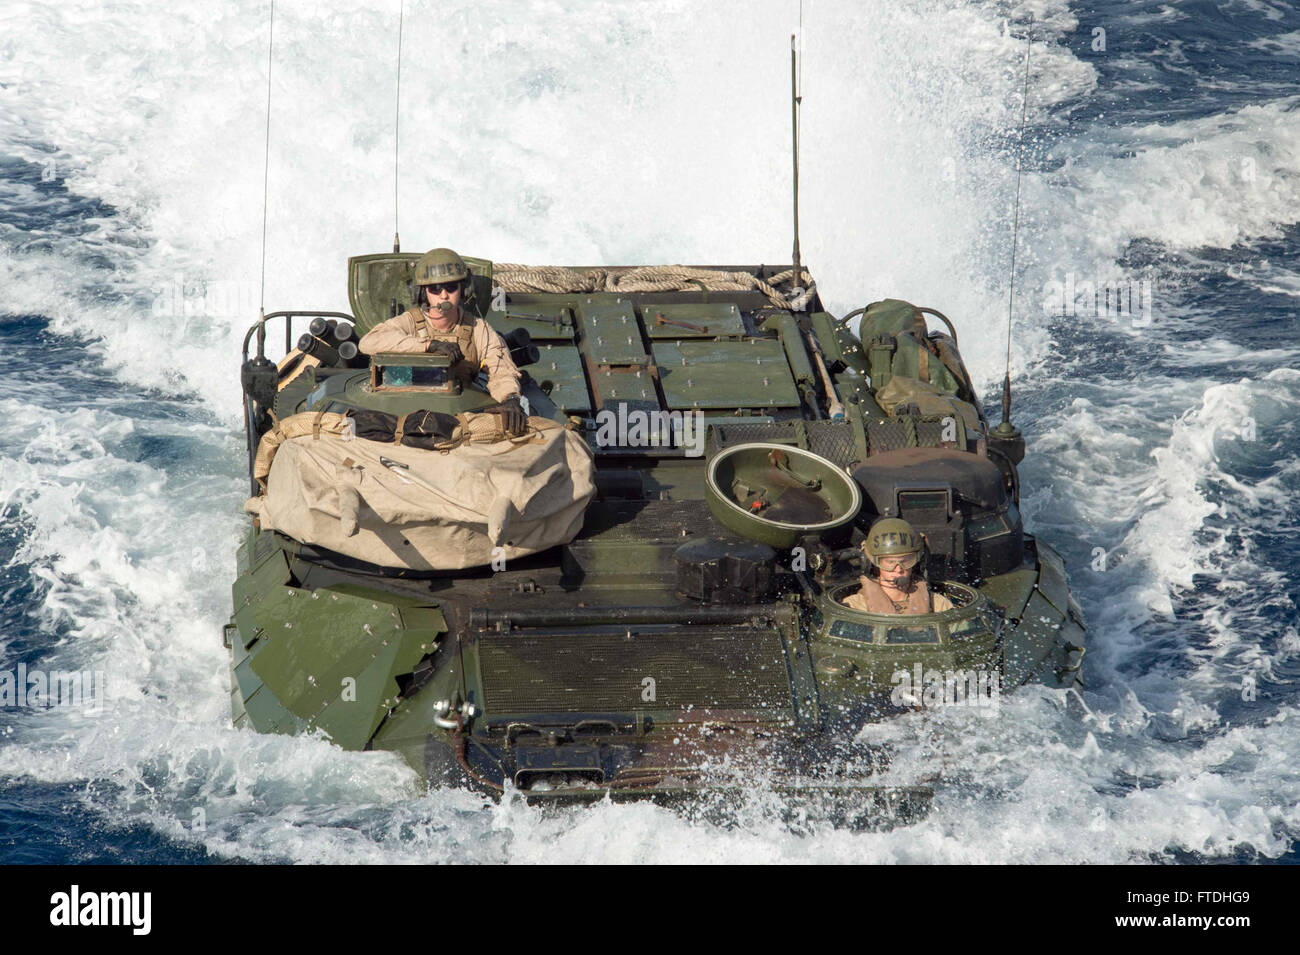 151028-N-JO245-924 MEDITERRANEAN SEA (Oct. 28, 2015) An amphibious assault vehicle from the 26th Marine Expeditionary Unit approaches the well deck of the amphibious dock landing ship USS Oak Hill (LSD 51) Oct. 28, 2015. Oak Hill, deployed as part of the Kearsarge Amphibious Ready Group, is conducting naval operations in the U.S. 6th Fleet area of operations in support of U.S. national security interests in Europe. (U.S. Navy photo by Mass Communication Specialist 2nd Class Justin Yarborough/Released) Stock Photo